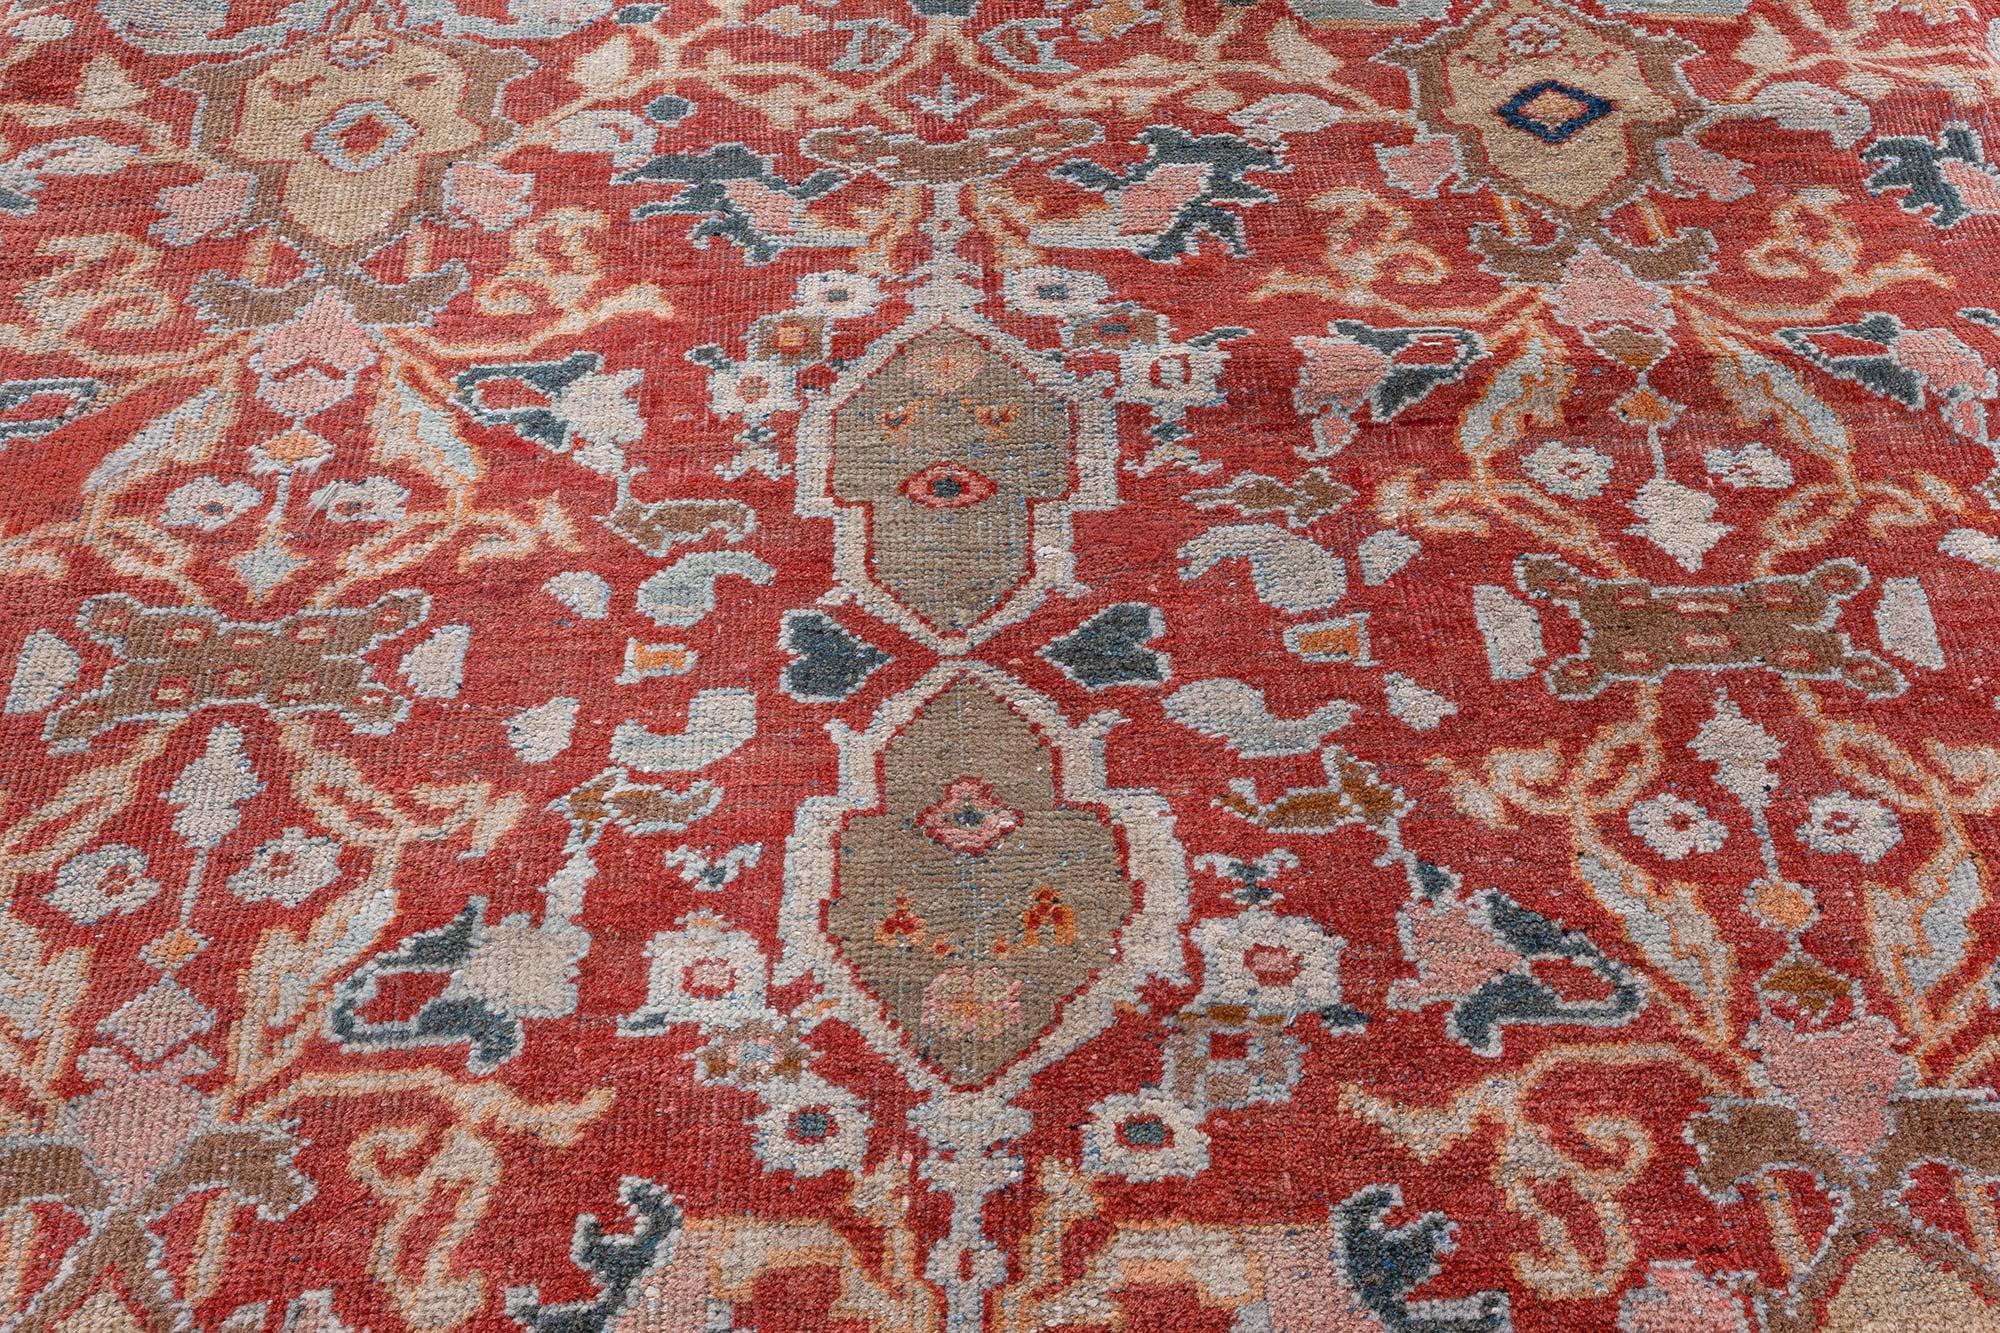 Antique Persian Sultanabad Rug
Size: 13'7